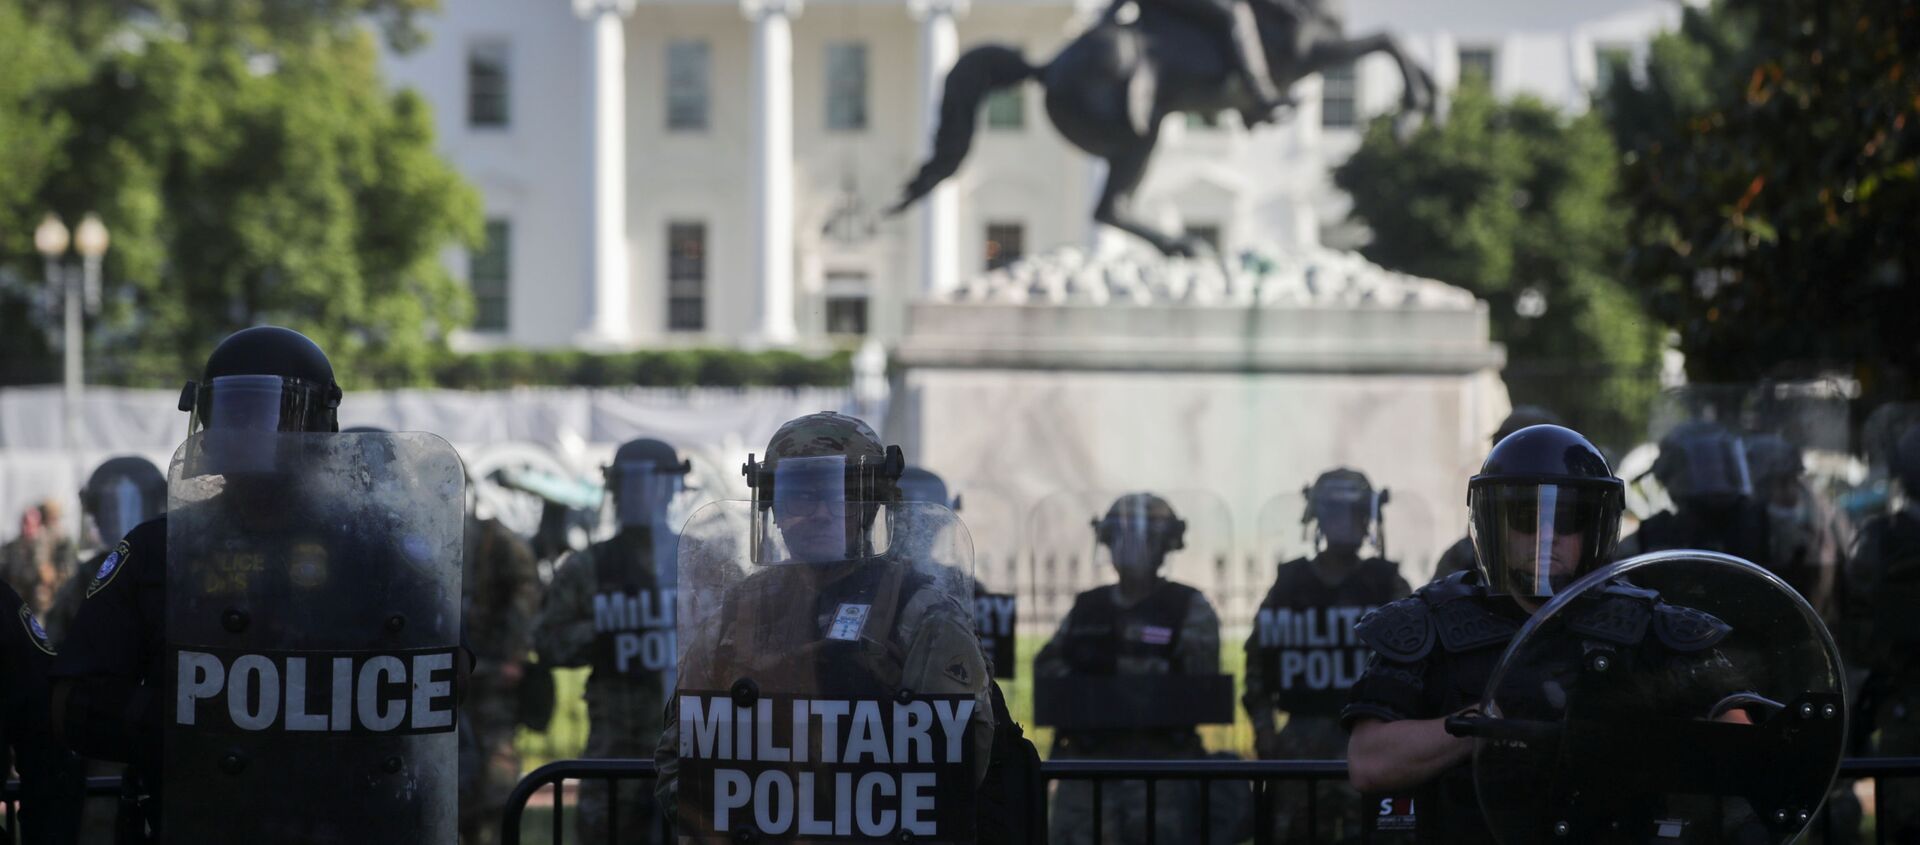 DC National Guard military police officers look on as demonstrators rally near the White House against the death in Minneapolis police custody of George Floyd, in Washington, D.C., U.S., June 1, 2020 - Sputnik International, 1920, 26.03.2021